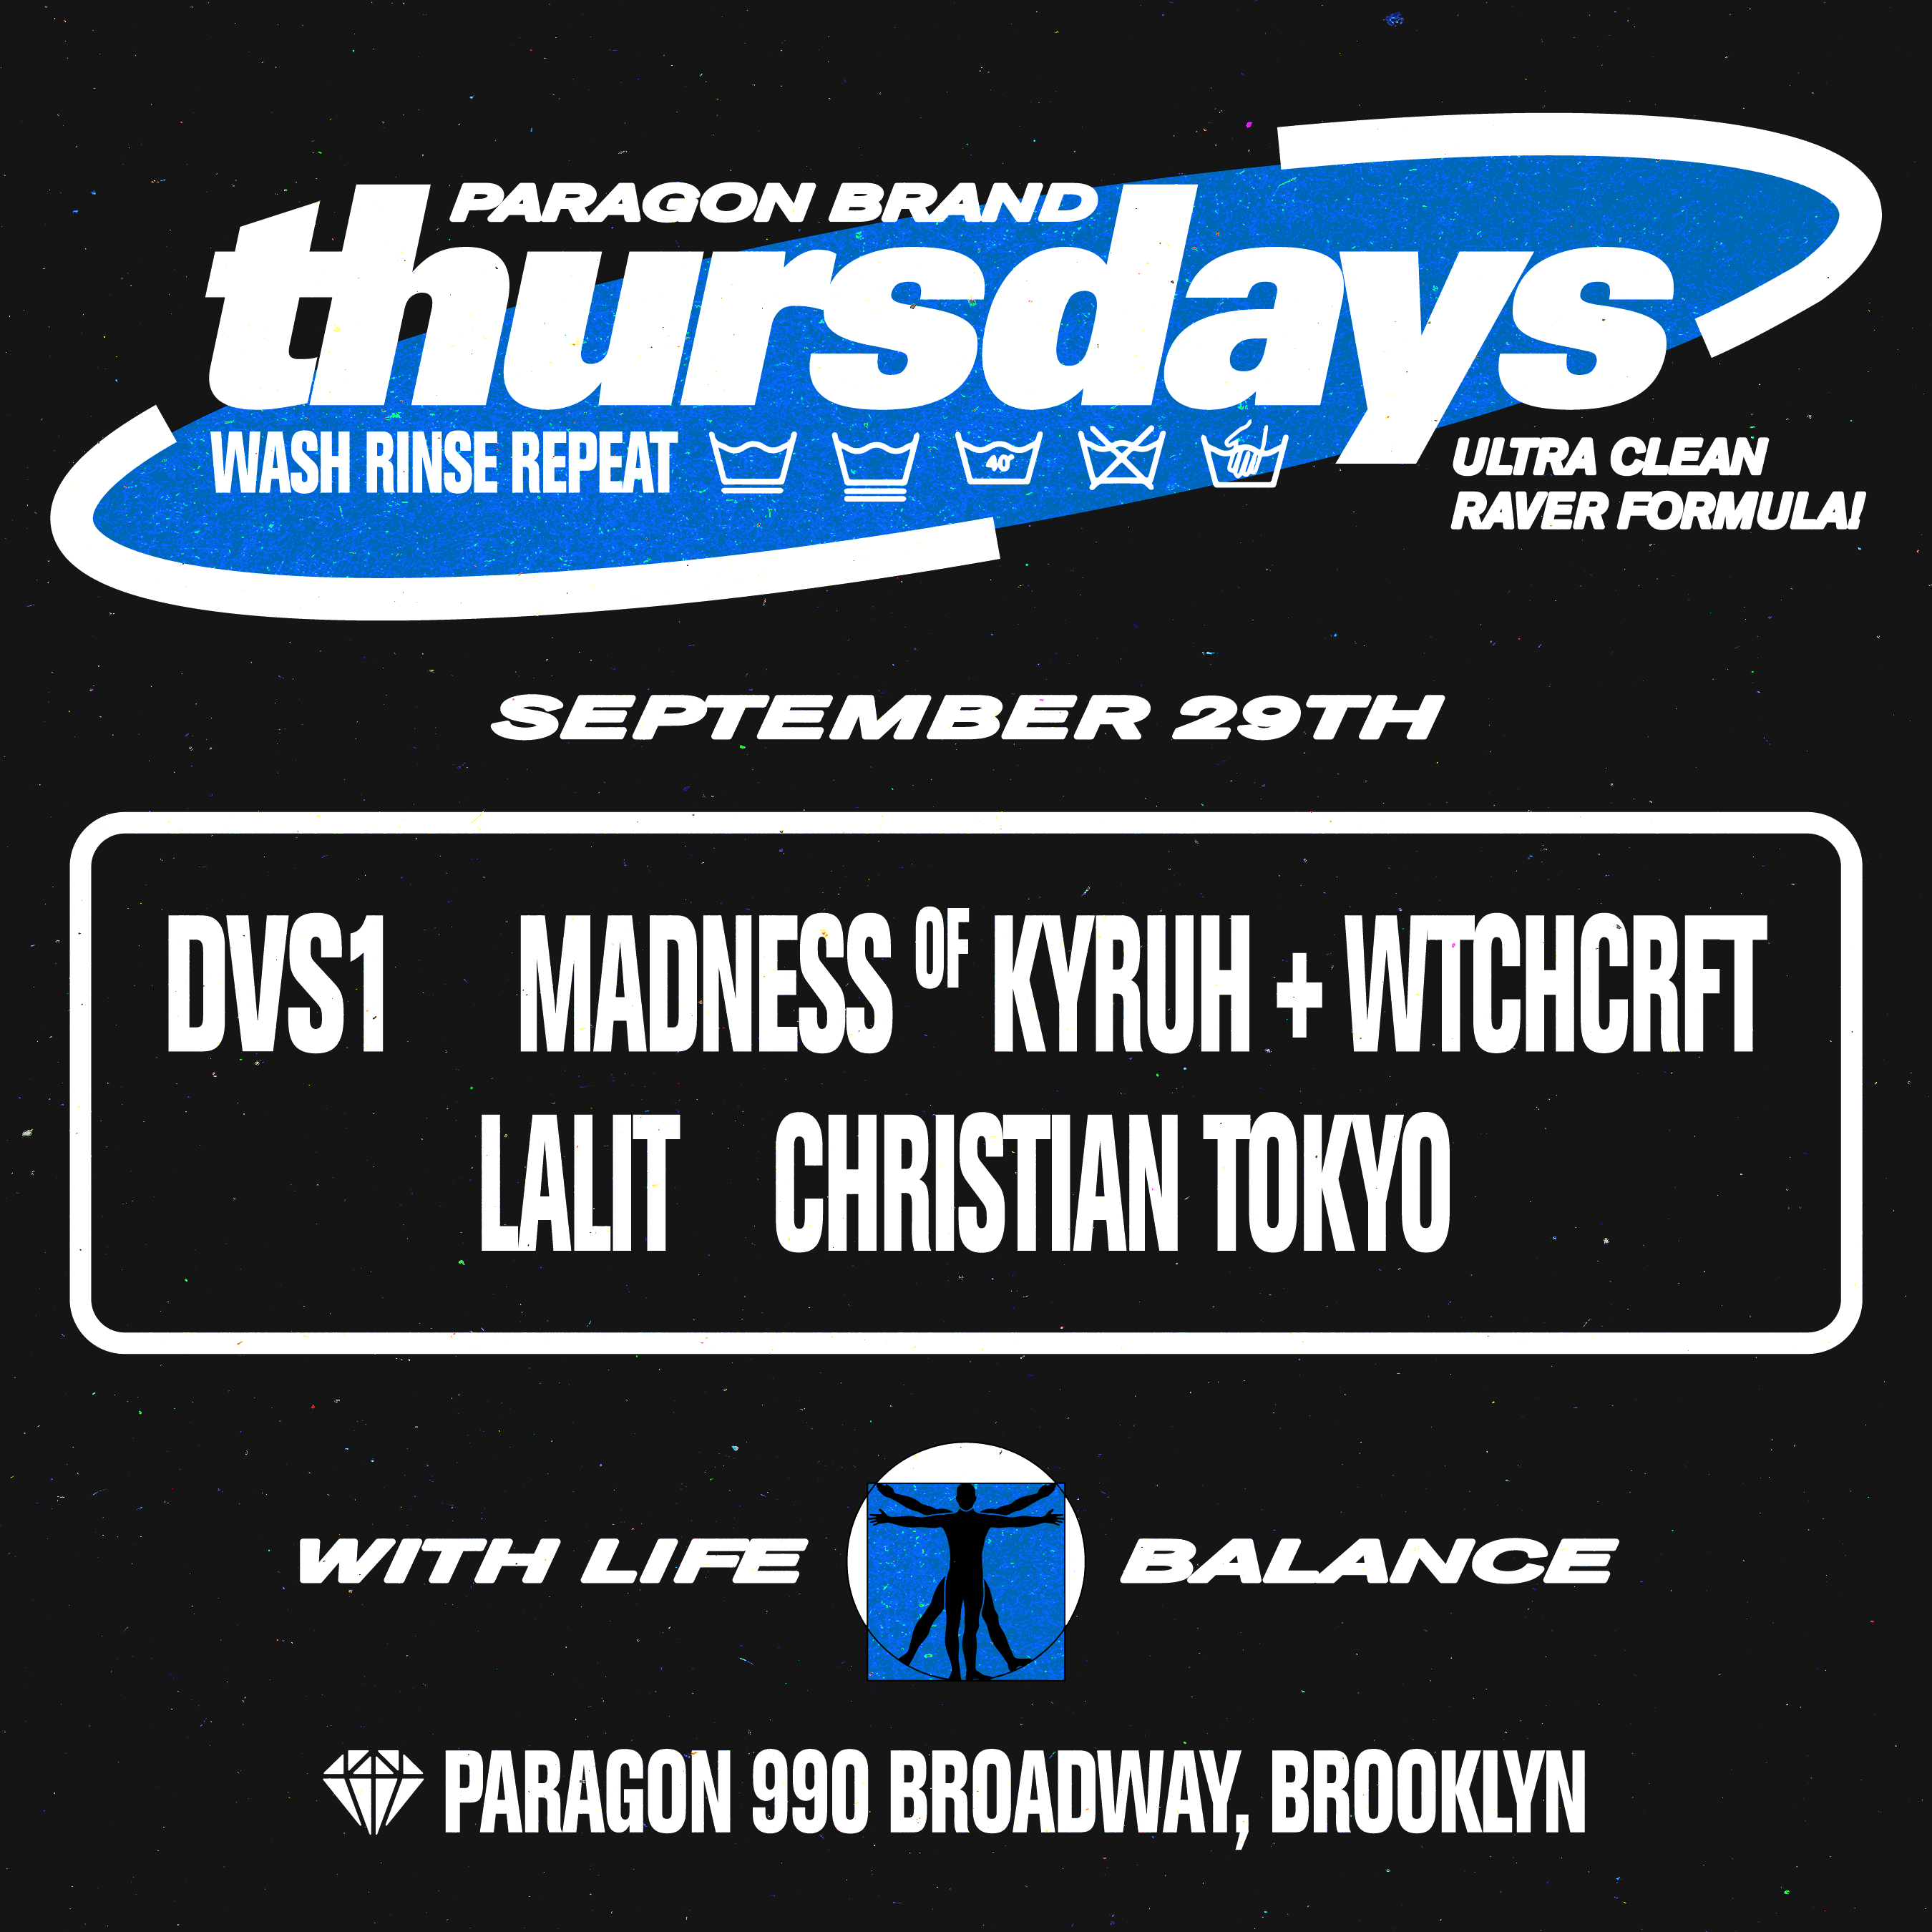 DVS1 MADNESS OF (KYRUH + WTCHCRFT) LALIT Christian Tokyo - フライヤー表